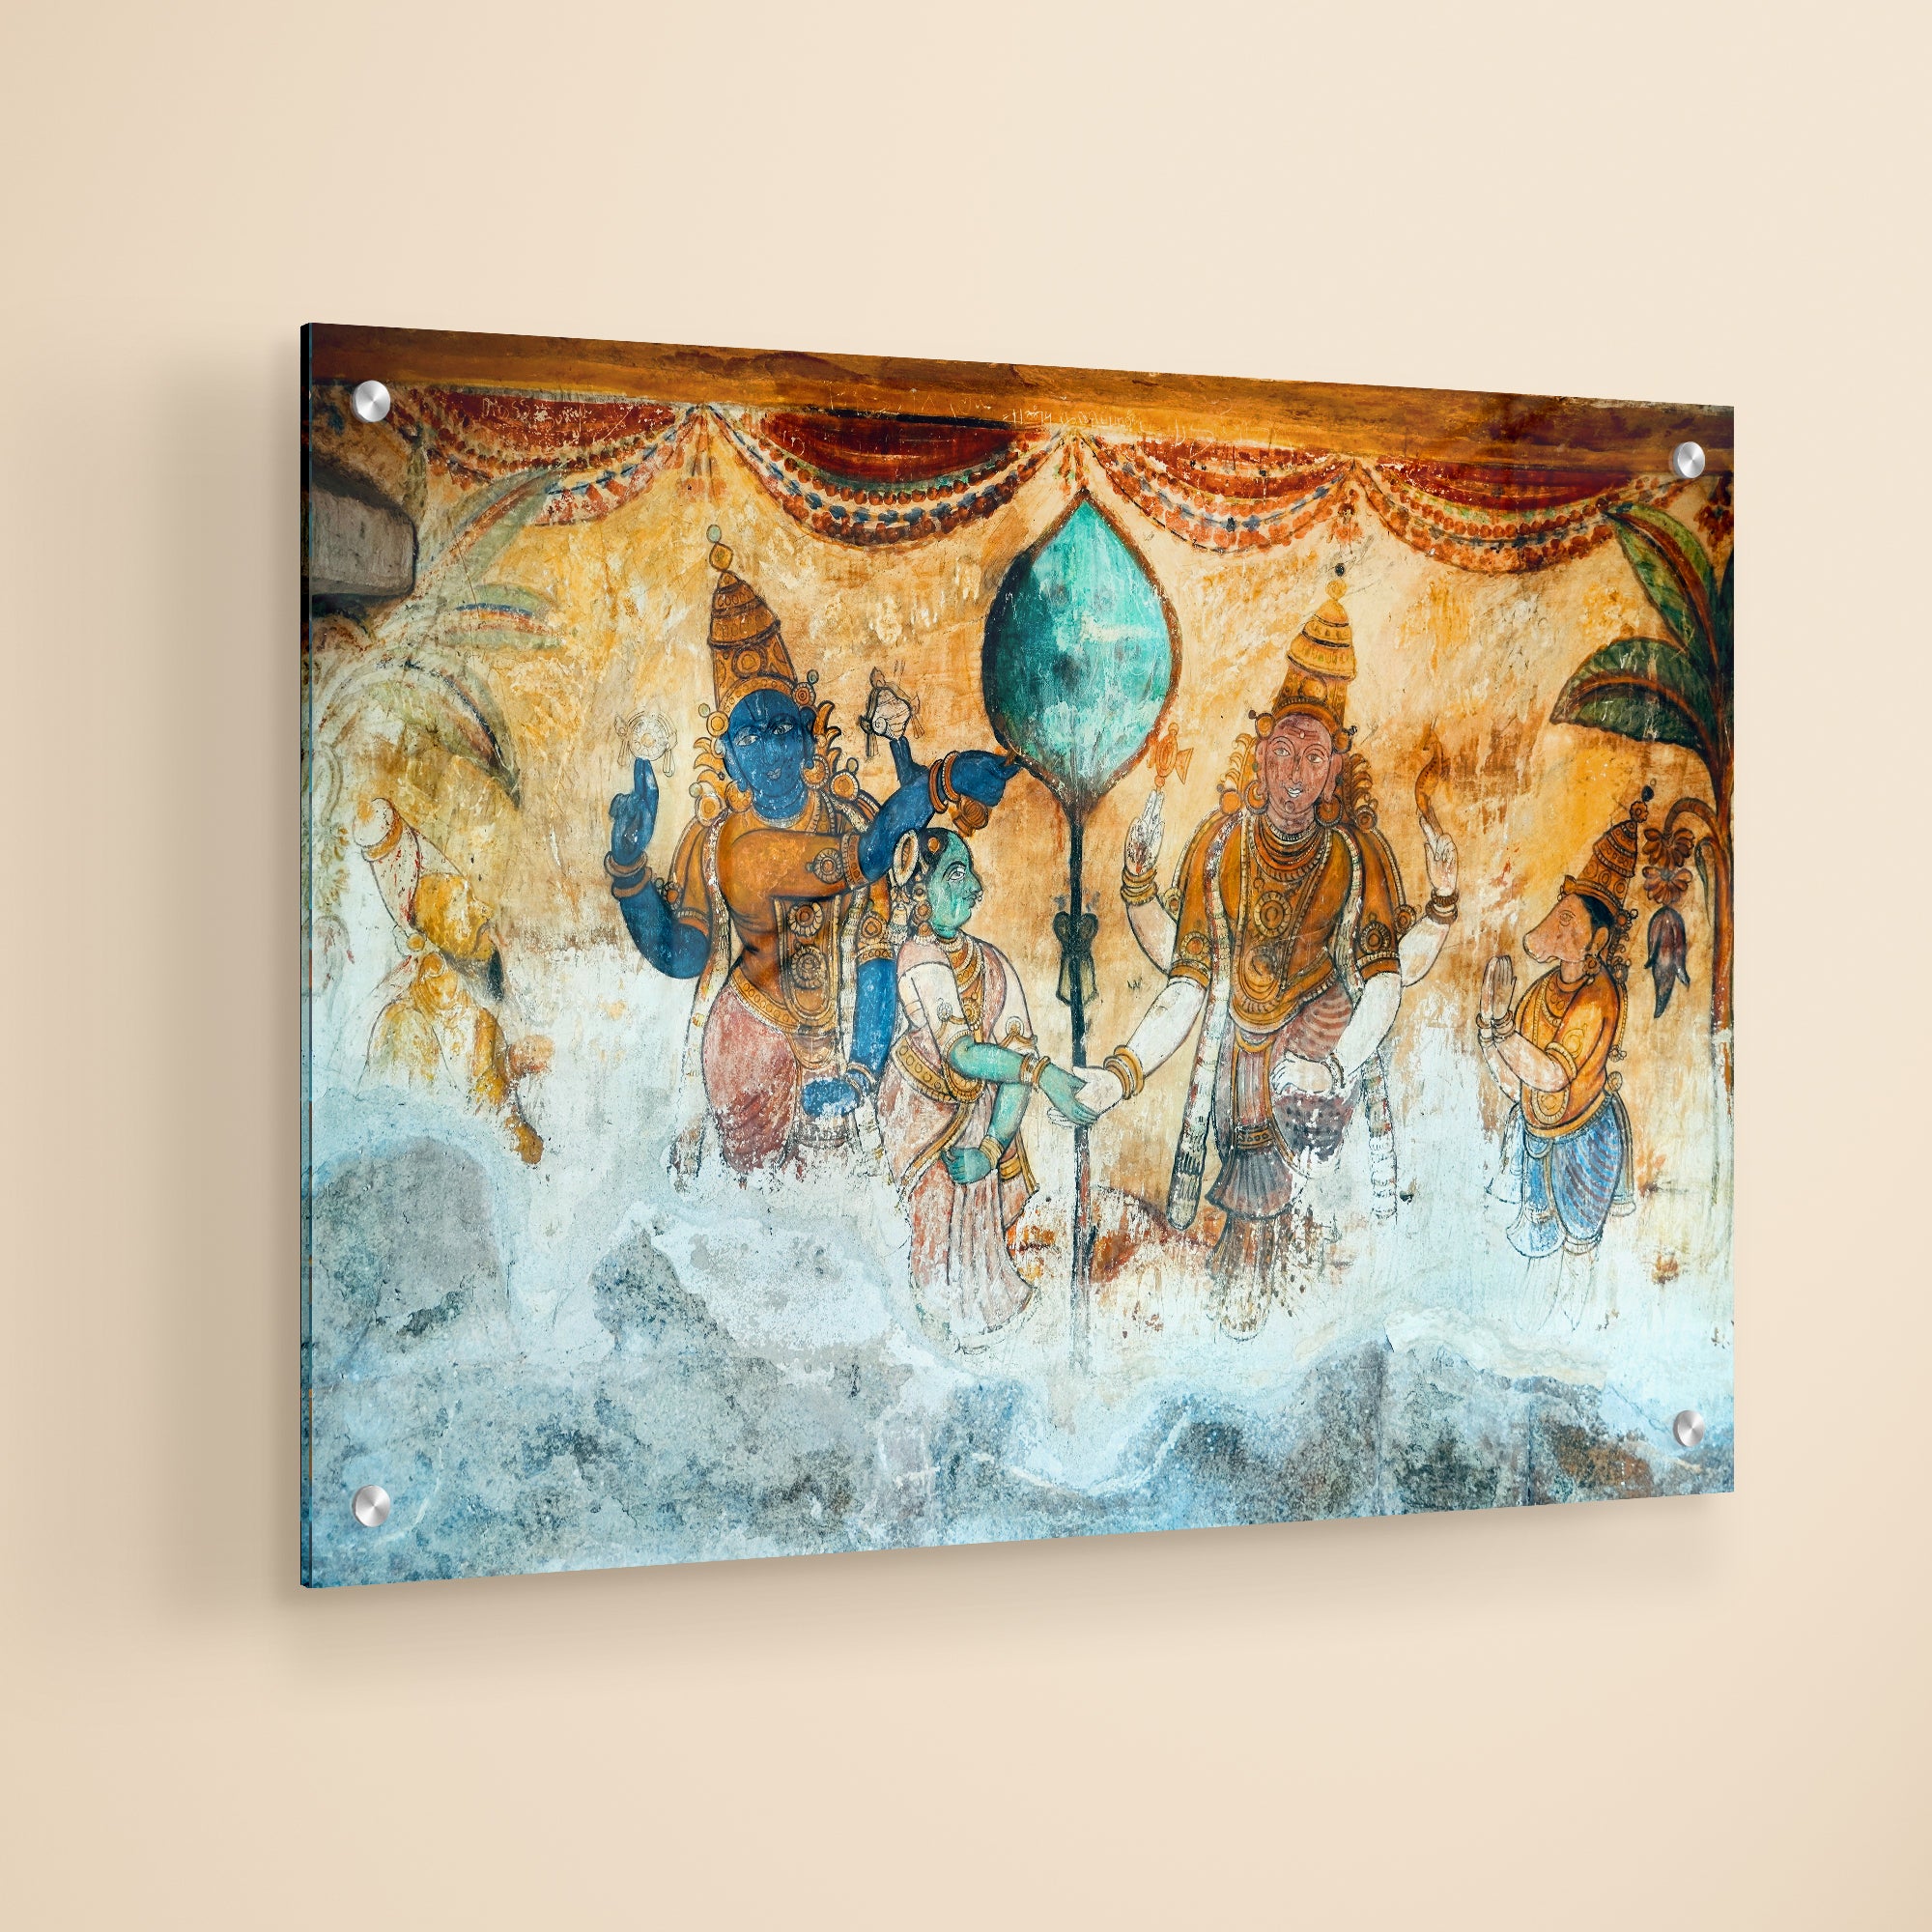 Ancient Indian Temple Fresco Premium Acrylic Wall Painting